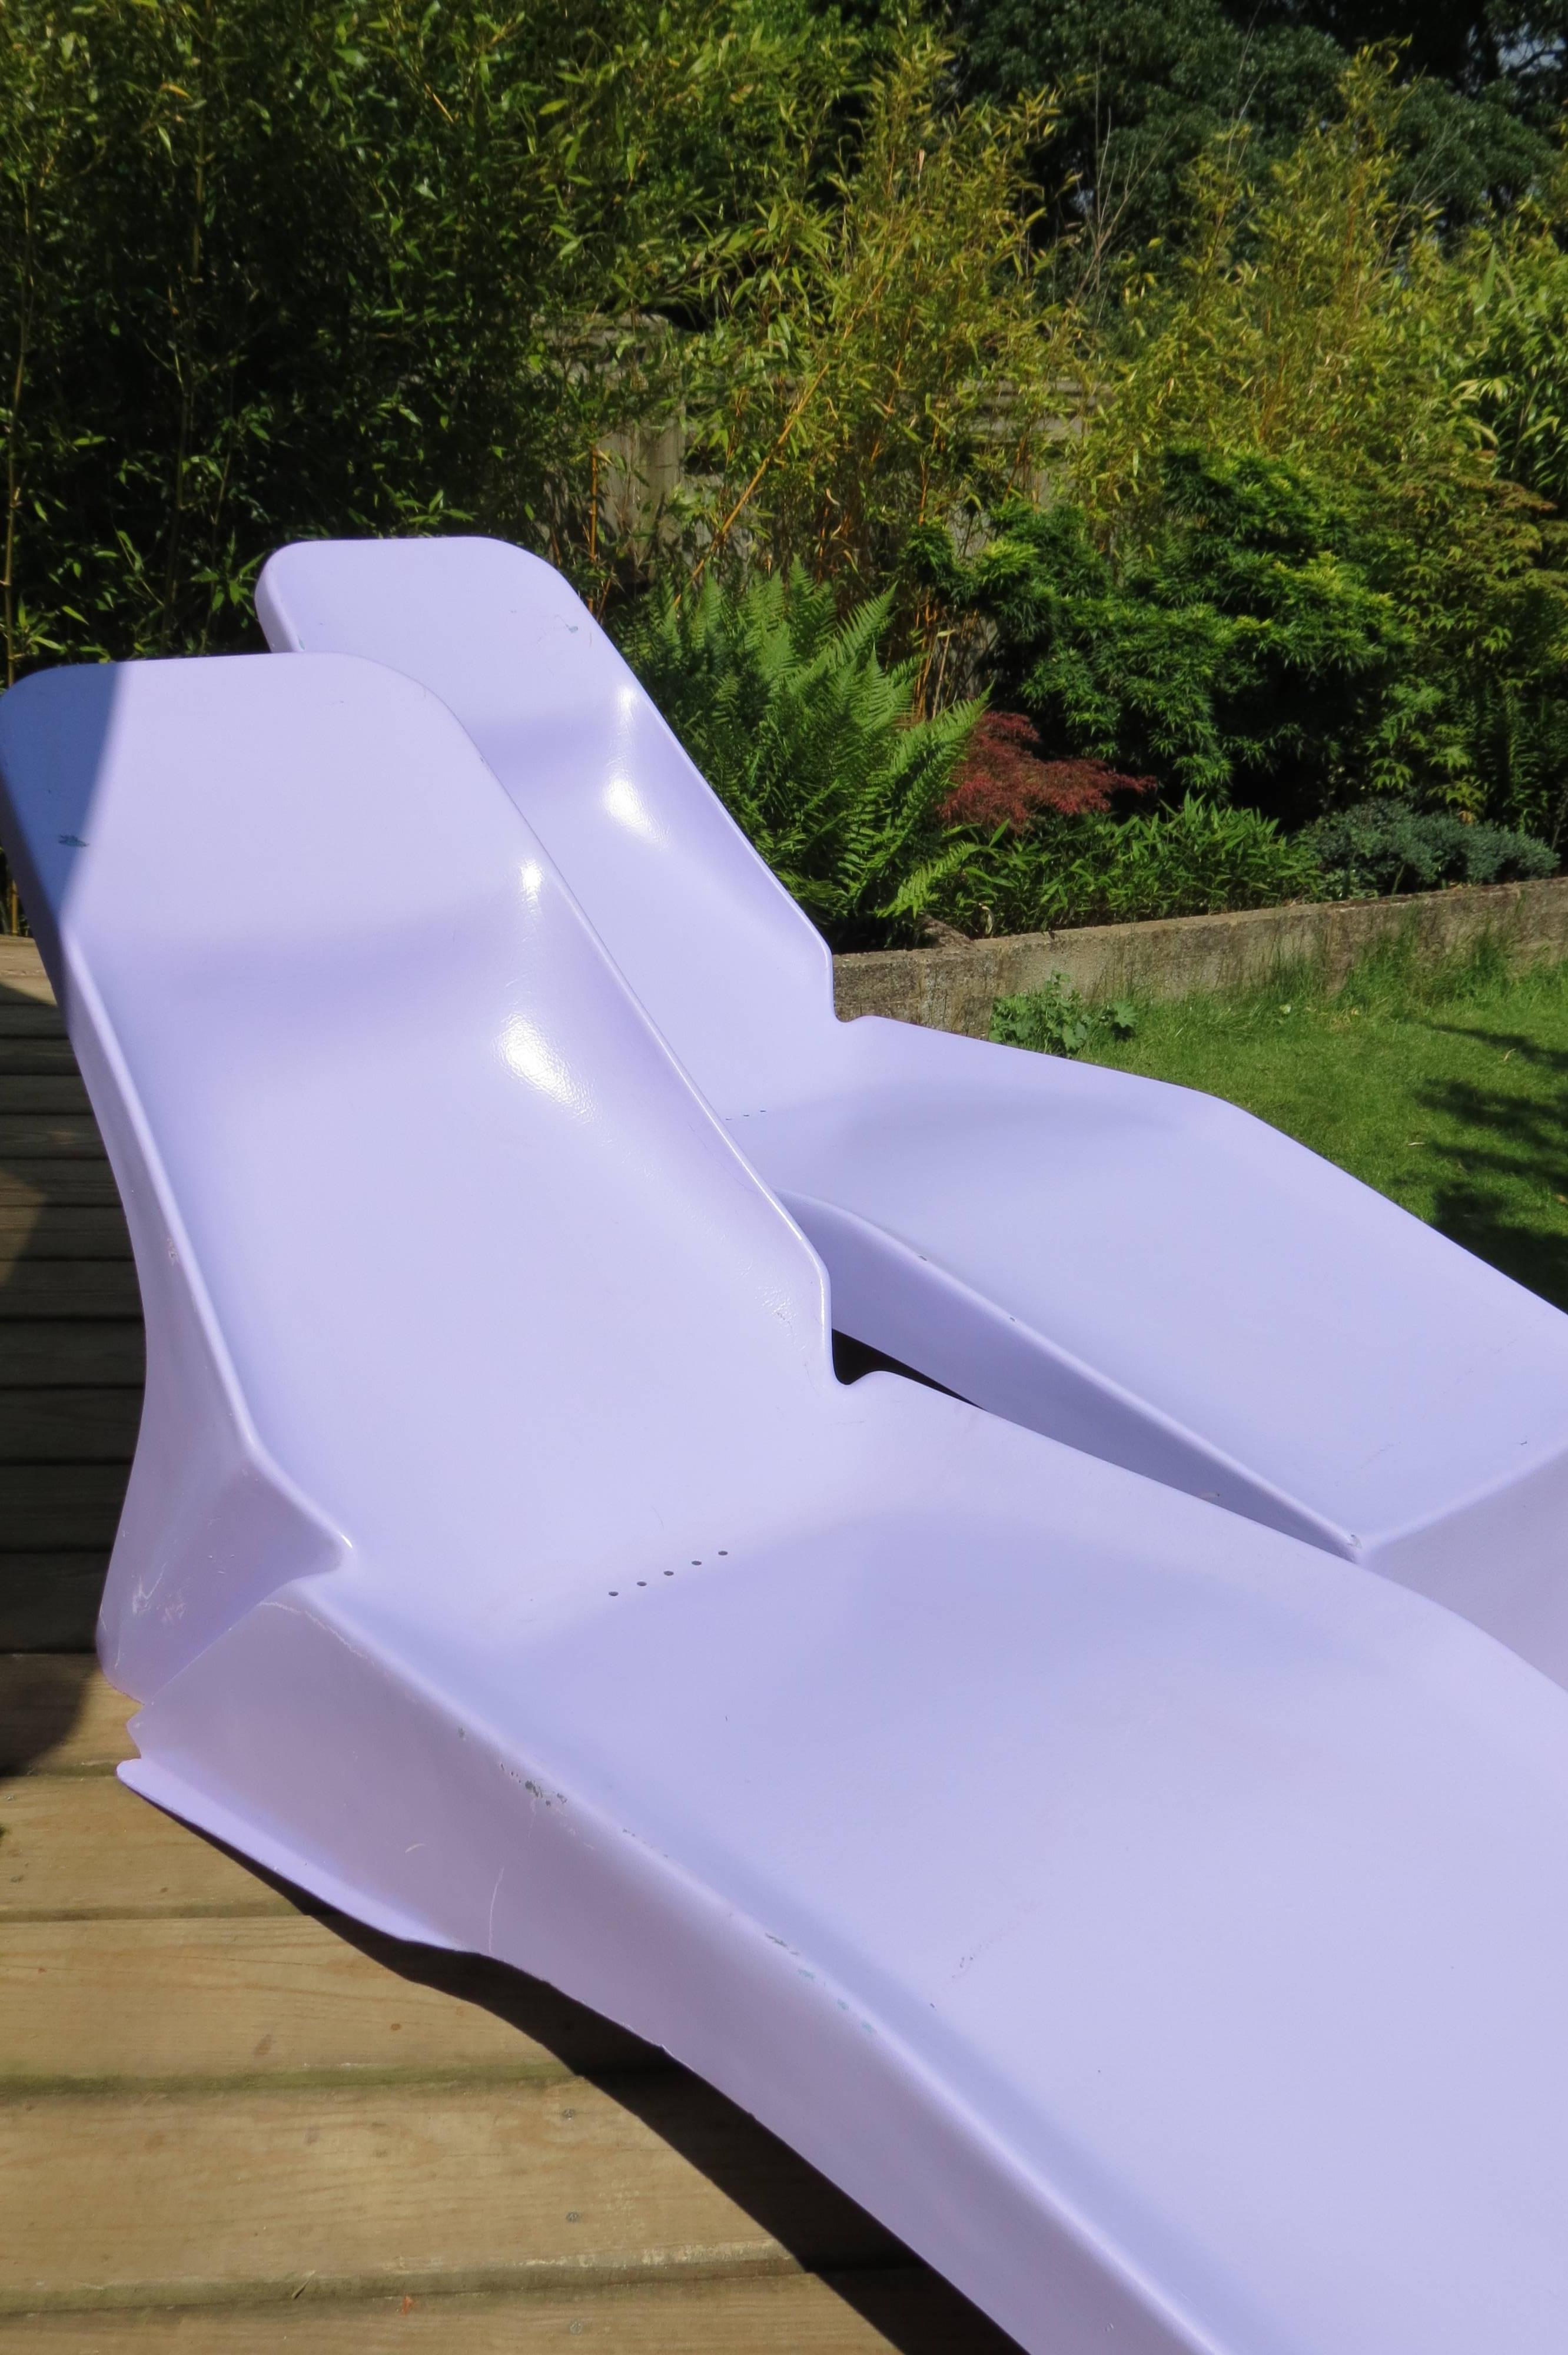 Original 1960s sunloungers made from fibreglass. In good vintage condition, some marks and loss of paint in areas as shown in the photographs. I believe they have been overpainted at some point, probably some time ago. A very stylish piece from the